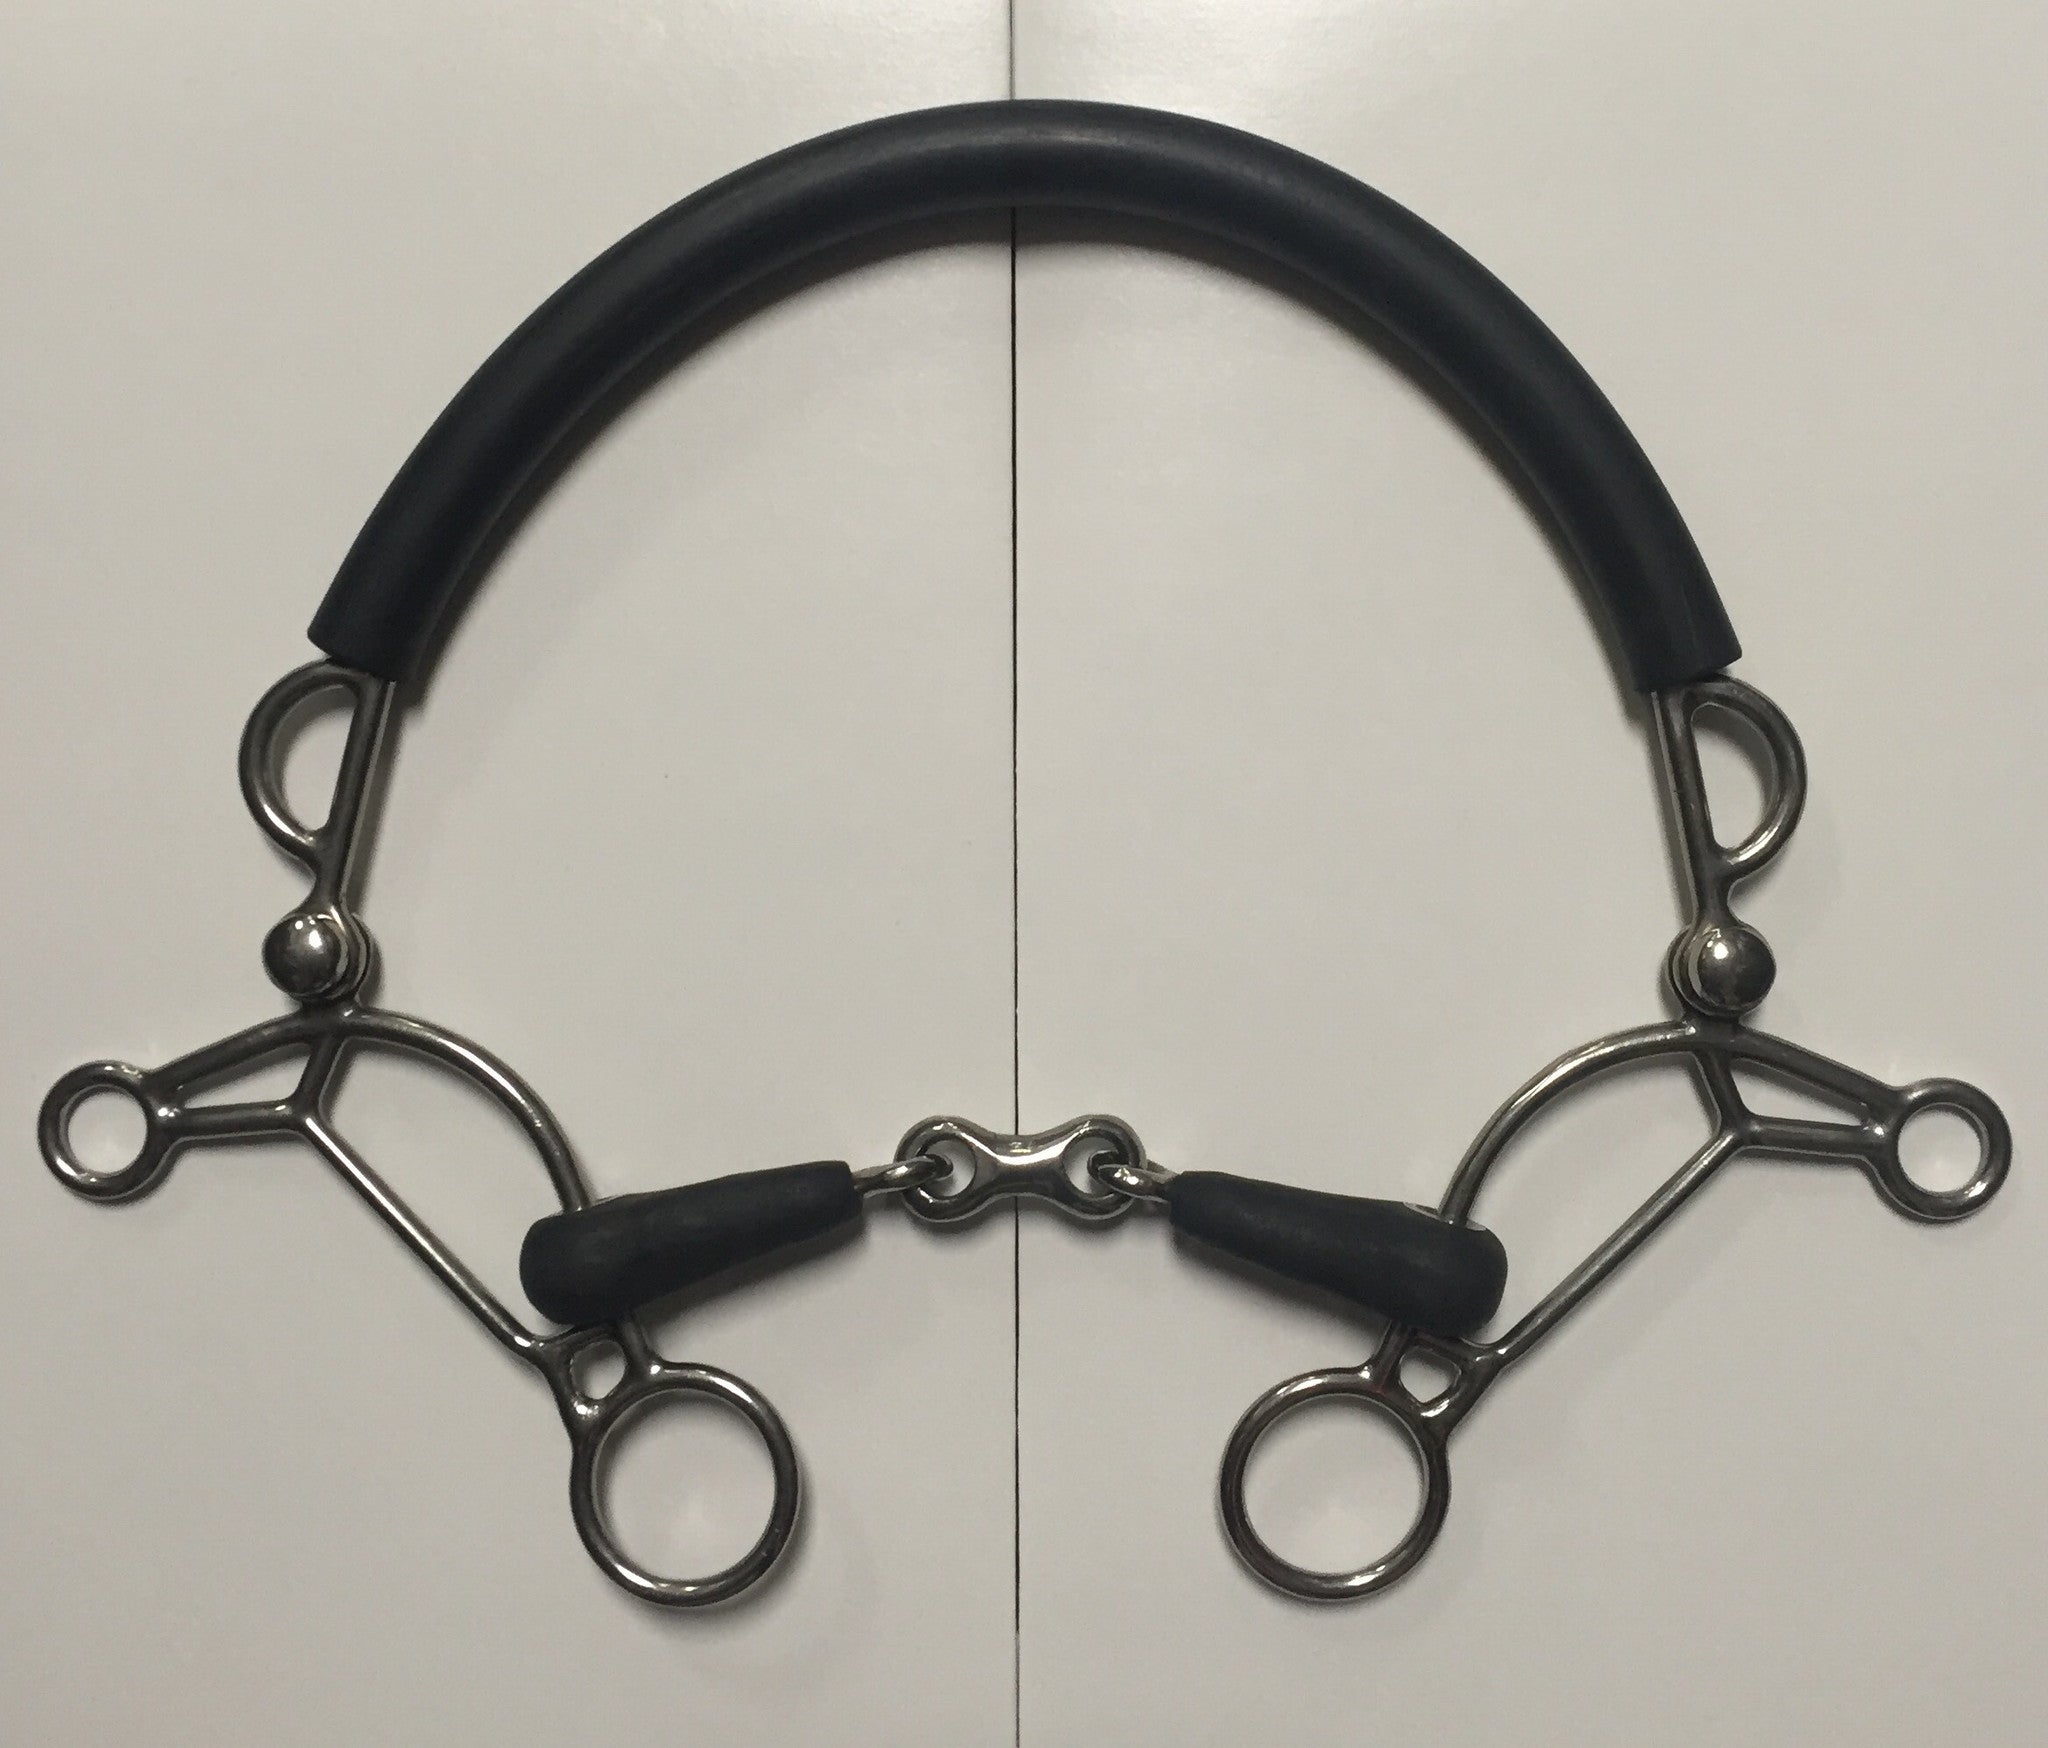 Abbey England Combination Hackamore Rubber French Link - The Tack Shop of Lexington